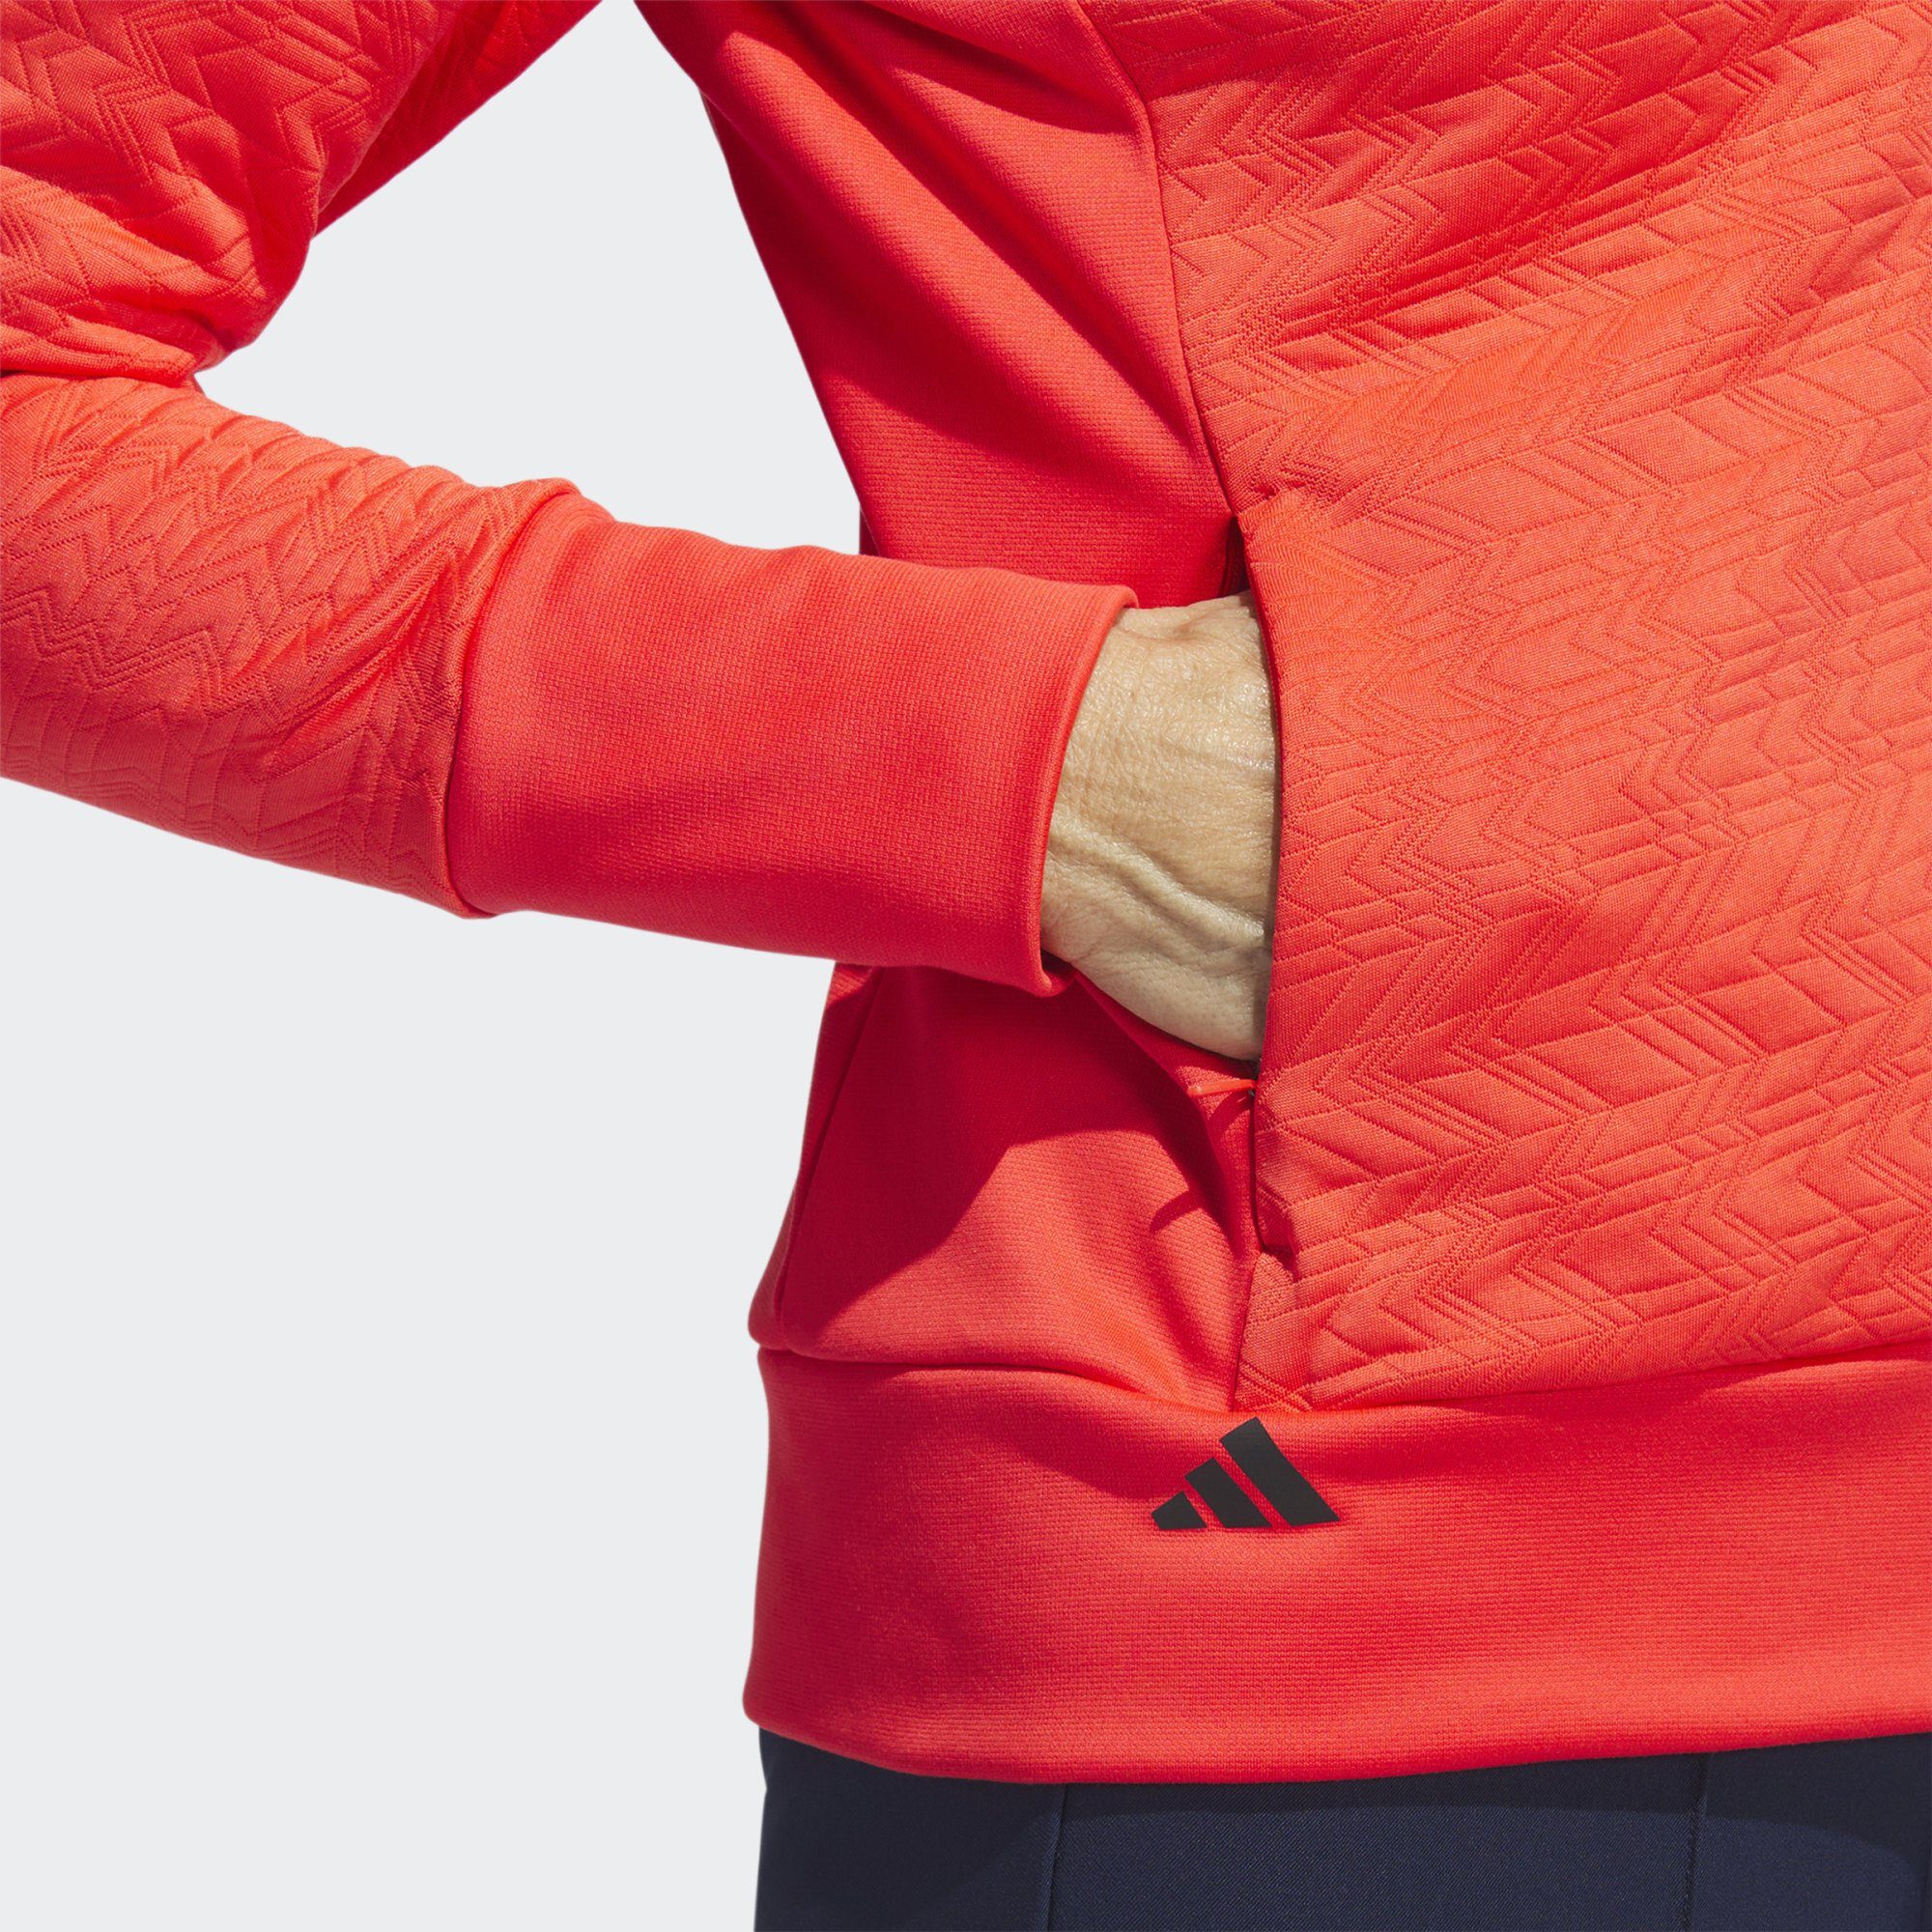 Performance Funktionsjacke JACKE adidas Red COLD.RDY Bright